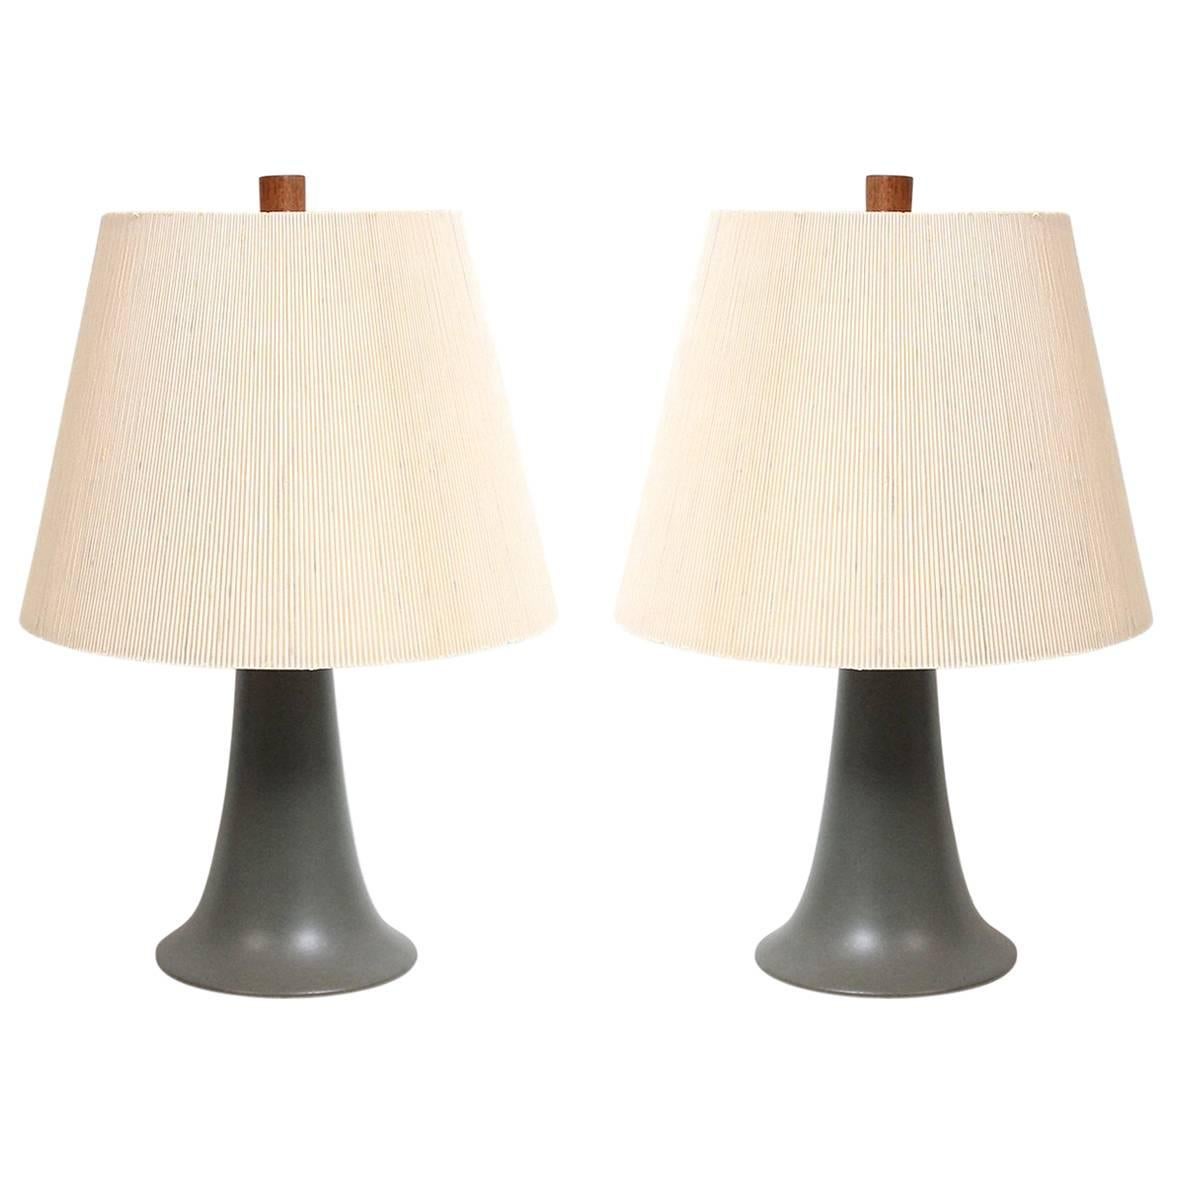 Pair of Ceramic Table Lamps by Martz